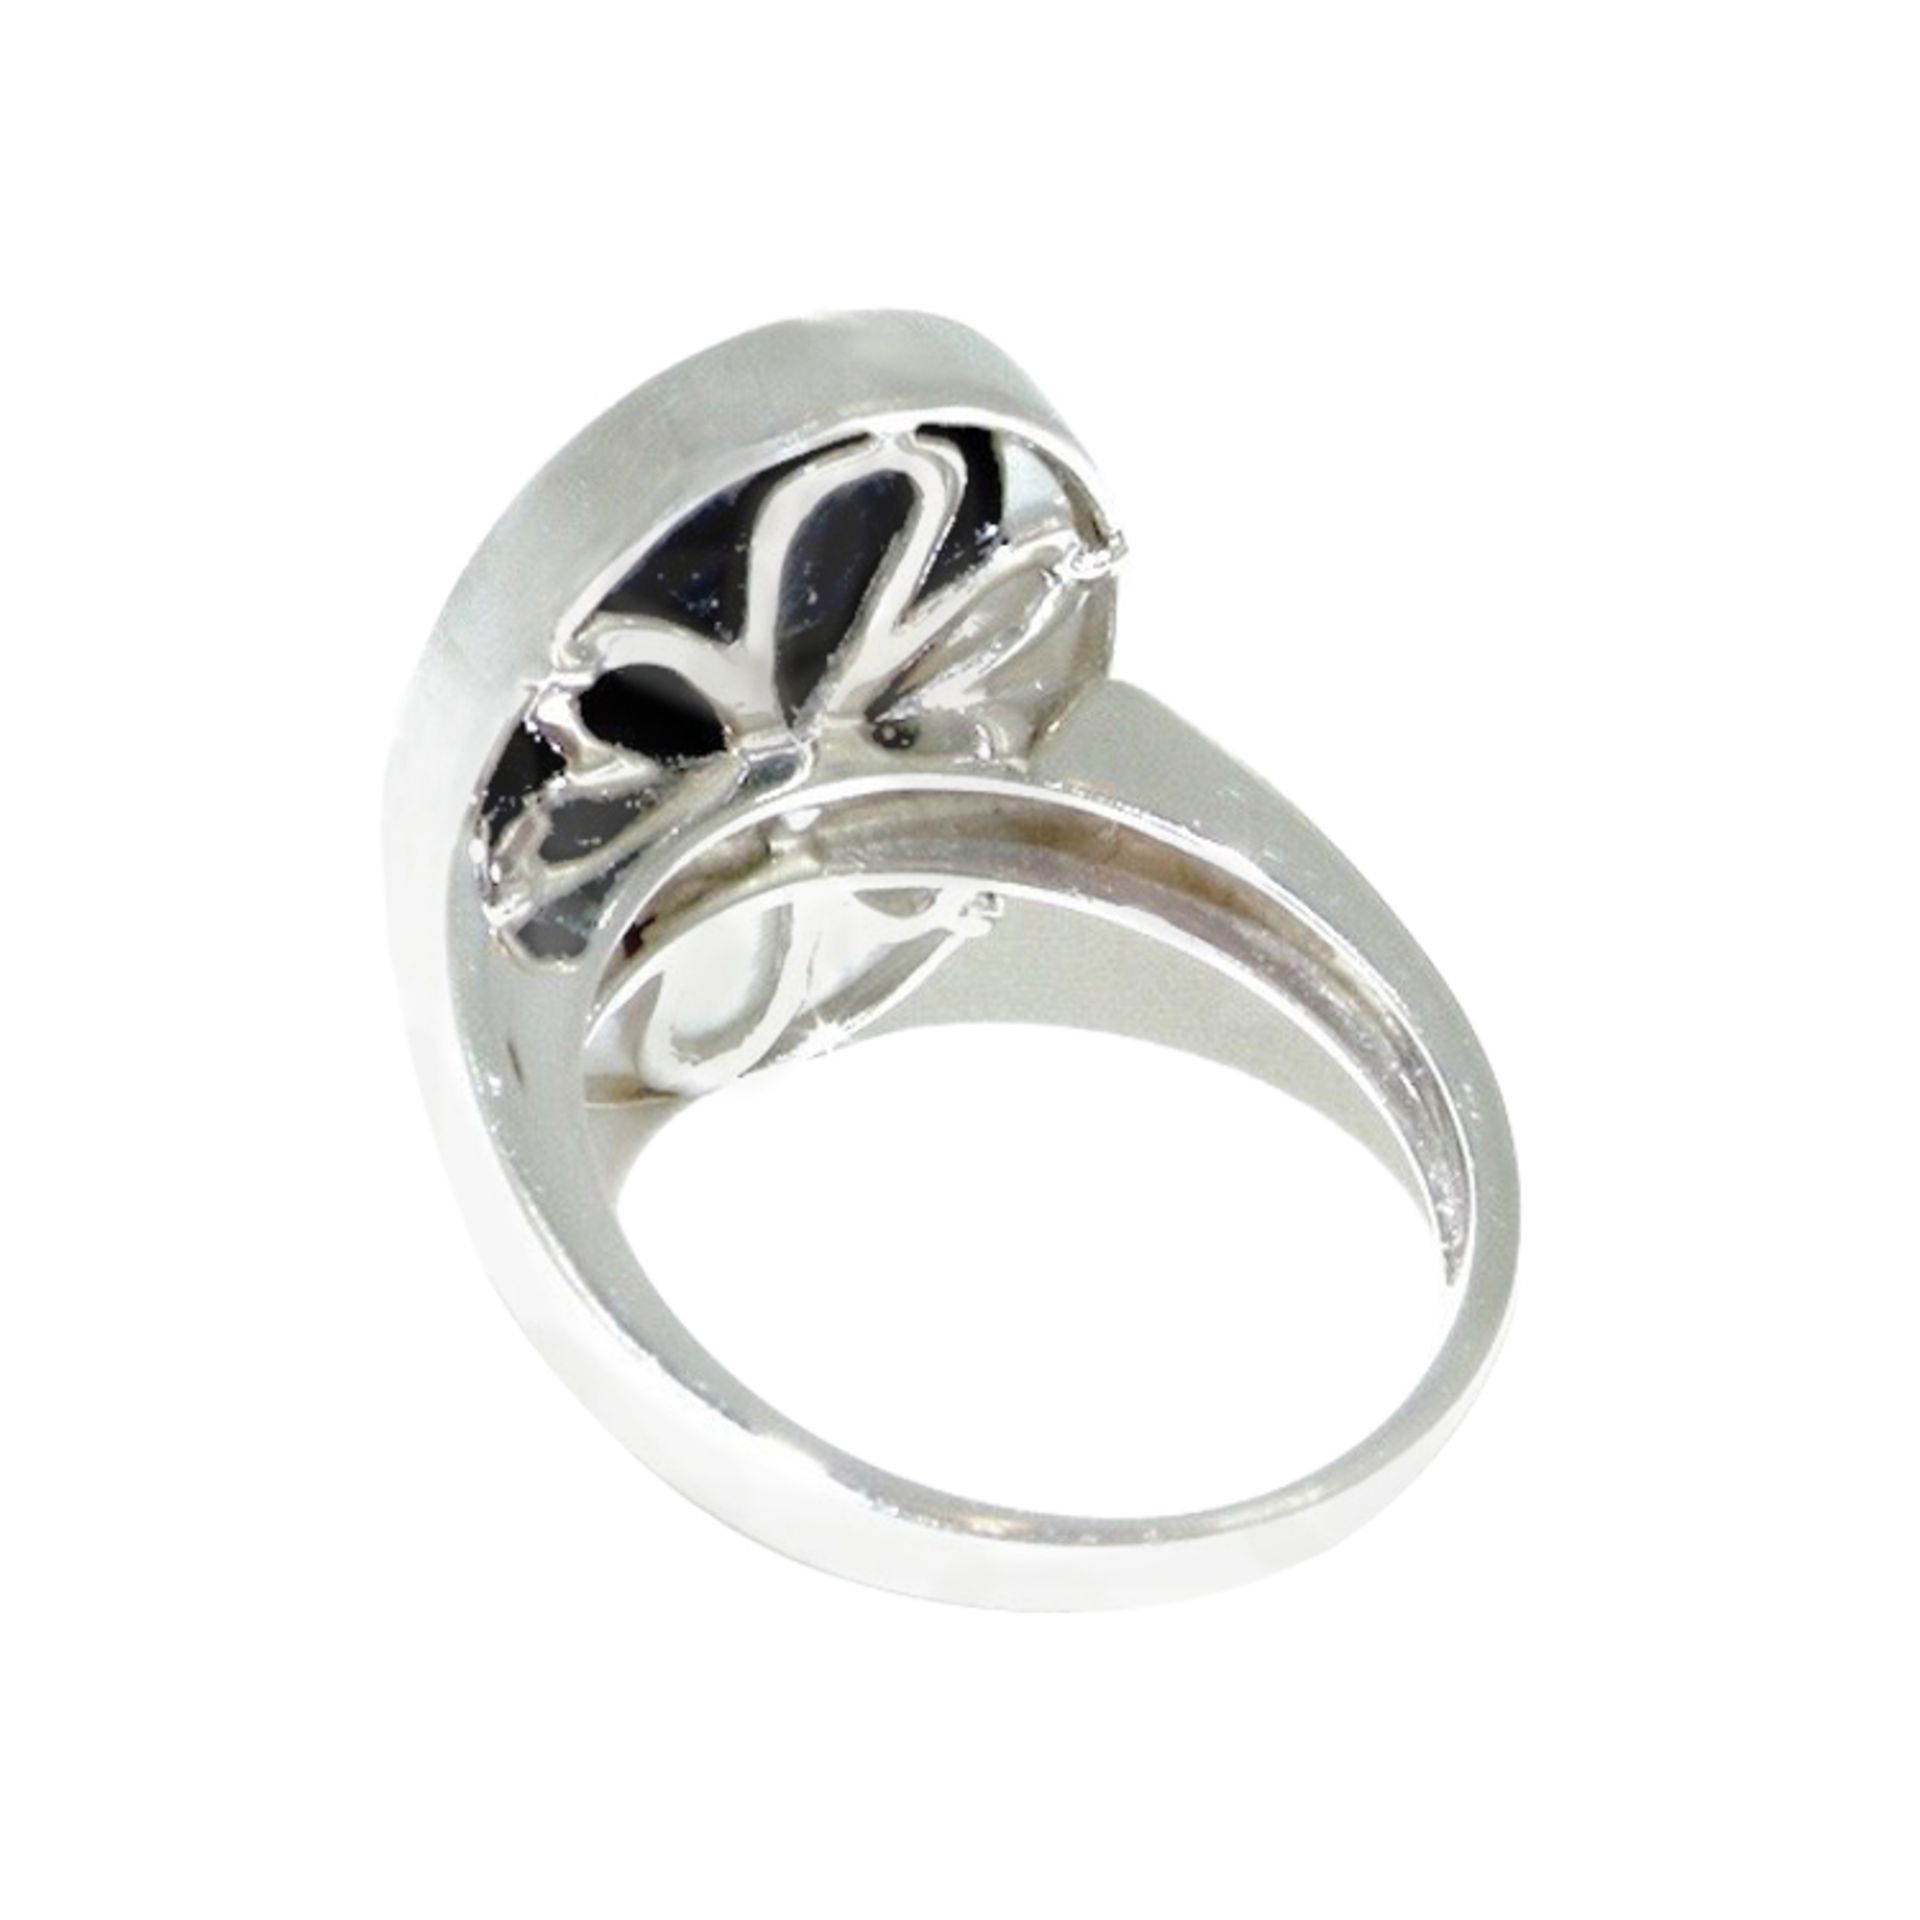 An Onyx, Mother Of Pearl And Diamond Ring - Image 4 of 5